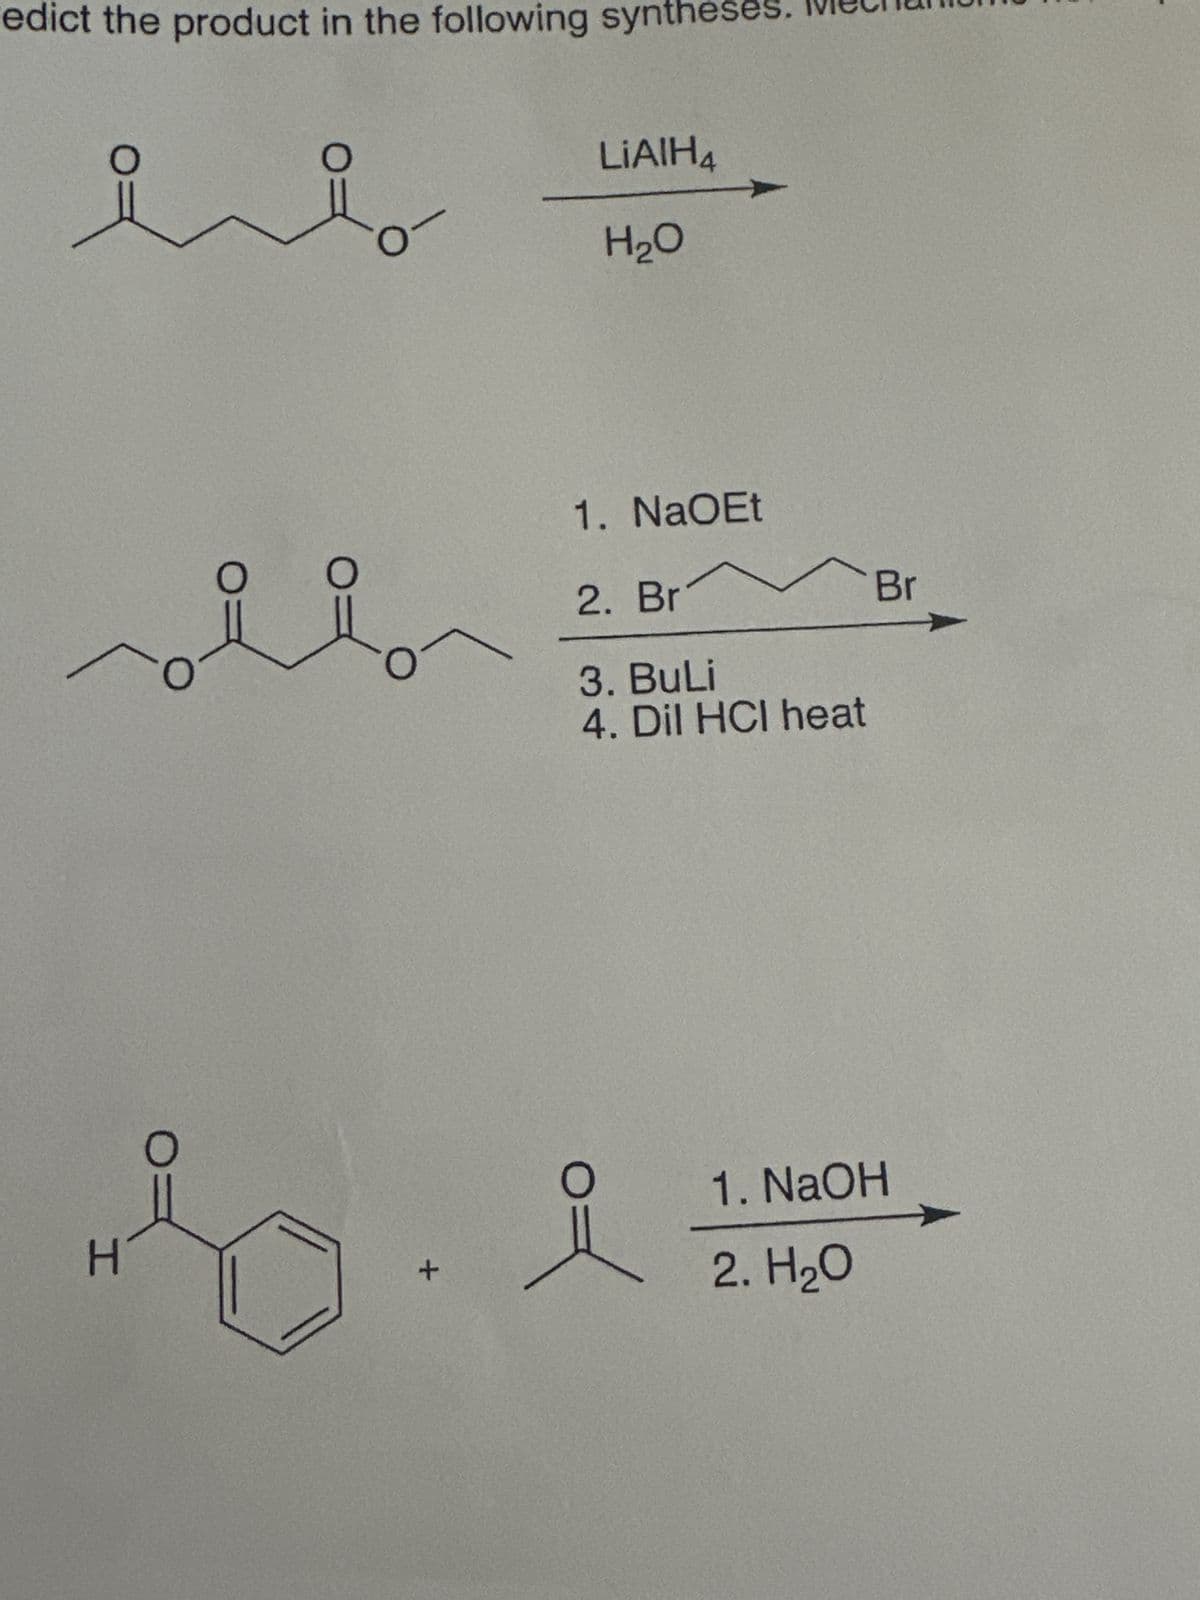 edict the product in the following syntheses. We
LiAlH4
H₂O
1. NaOEt
2. Br
3. BuLi
4. Dil HCI heat
H
1. NaOH
2. H₂O
Br